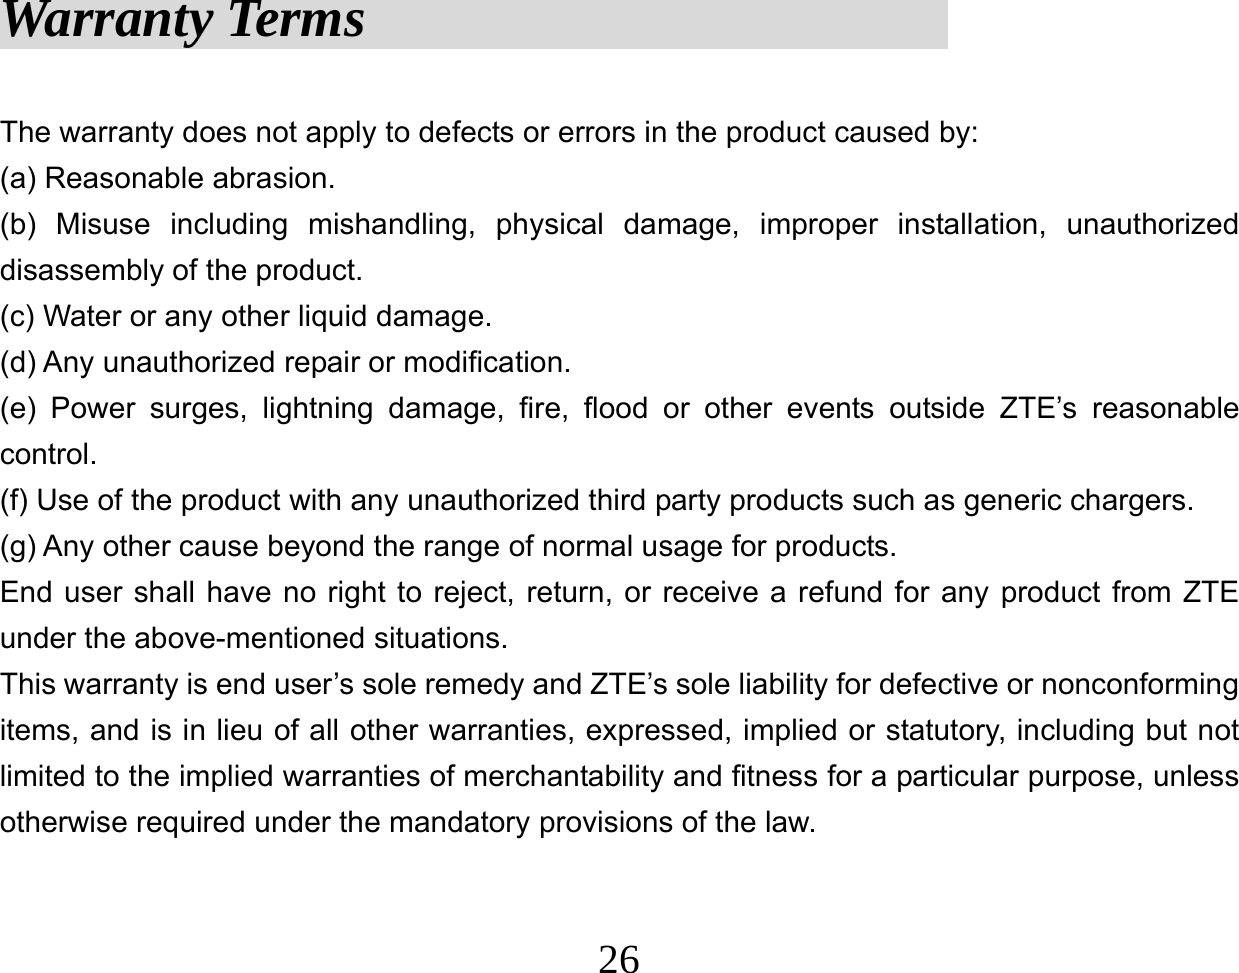  26Warranty Terms                      The warranty does not apply to defects or errors in the product caused by: (a) Reasonable abrasion. (b) Misuse including mishandling, physical damage, improper installation, unauthorized disassembly of the product. (c) Water or any other liquid damage. (d) Any unauthorized repair or modification. (e) Power surges, lightning damage, fire, flood or other events outside ZTE’s reasonable control. (f) Use of the product with any unauthorized third party products such as generic chargers. (g) Any other cause beyond the range of normal usage for products.   End user shall have no right to reject, return, or receive a refund for any product from ZTE under the above-mentioned situations. This warranty is end user’s sole remedy and ZTE’s sole liability for defective or nonconforming items, and is in lieu of all other warranties, expressed, implied or statutory, including but not limited to the implied warranties of merchantability and fitness for a particular purpose, unless otherwise required under the mandatory provisions of the law.   